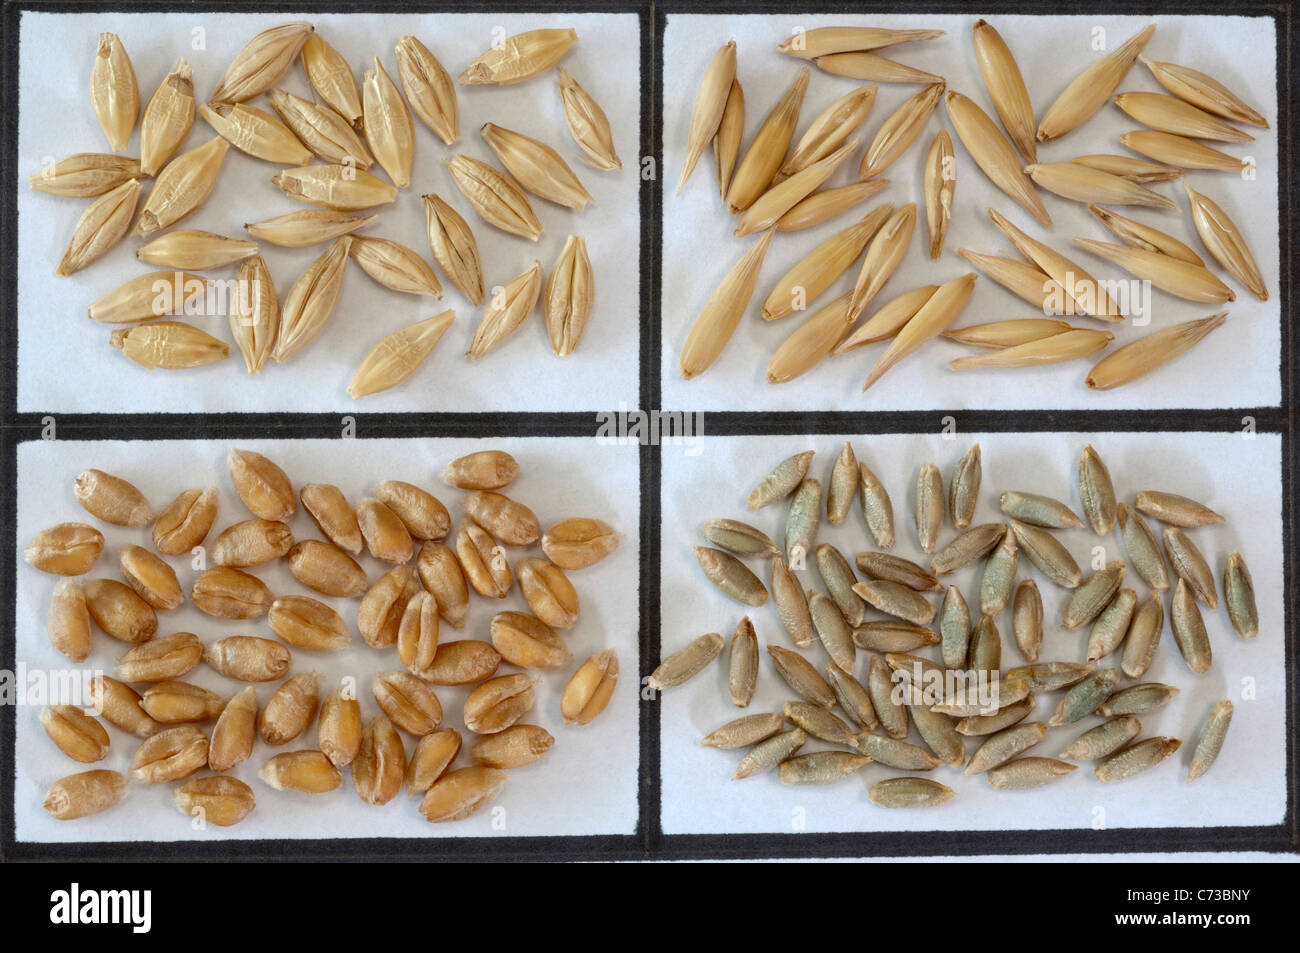 Various cereals: Barley (Hordeum distichon), Oats (Avena sativa), Wheat (Triticum aestivum) and Rye (Secale cereale). Stock Photo